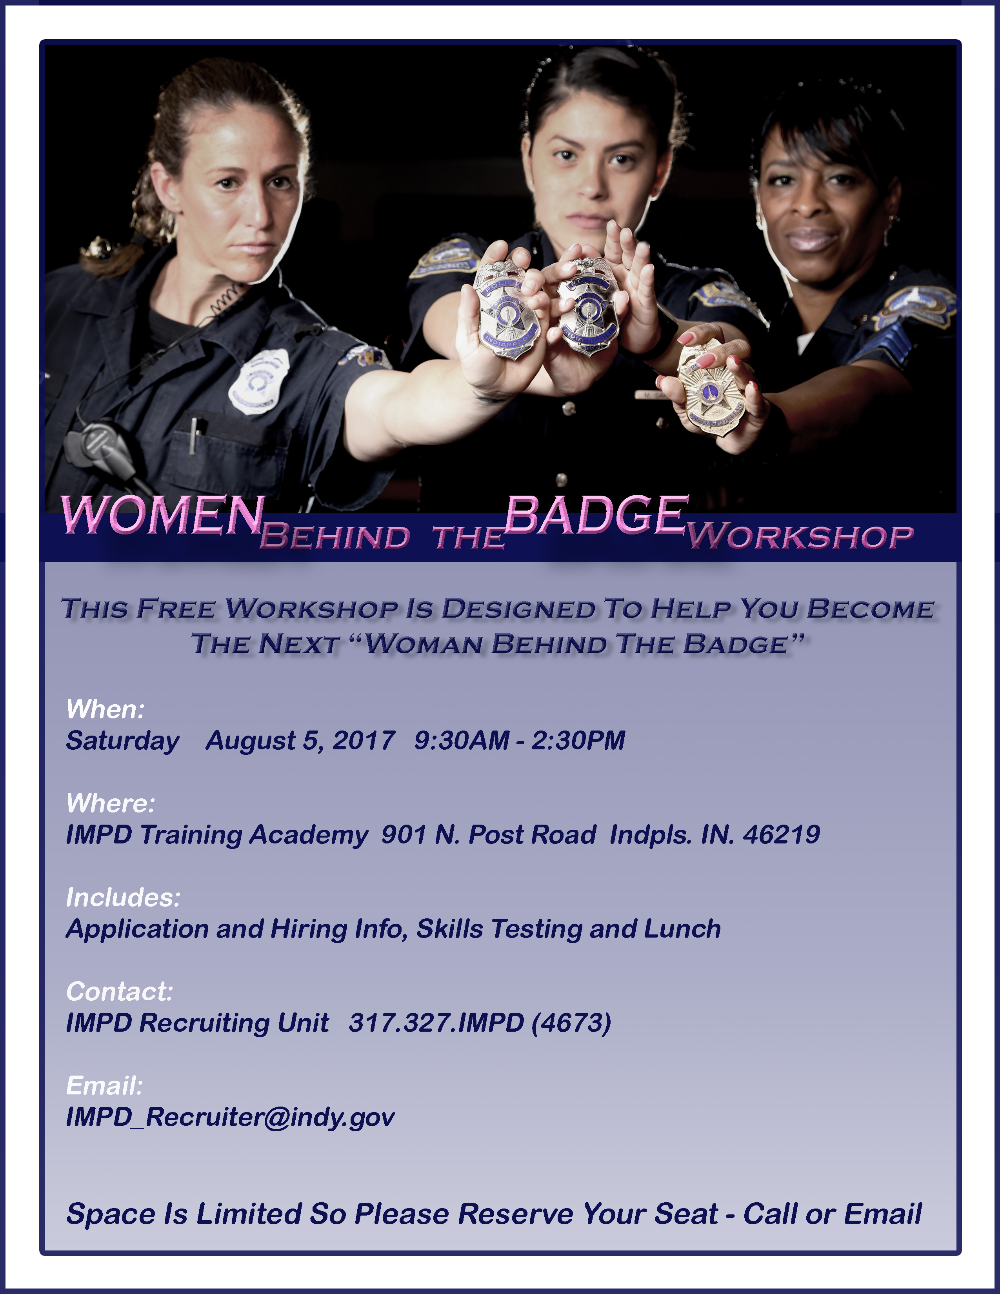 Are You the Next Woman Behind the Badge?